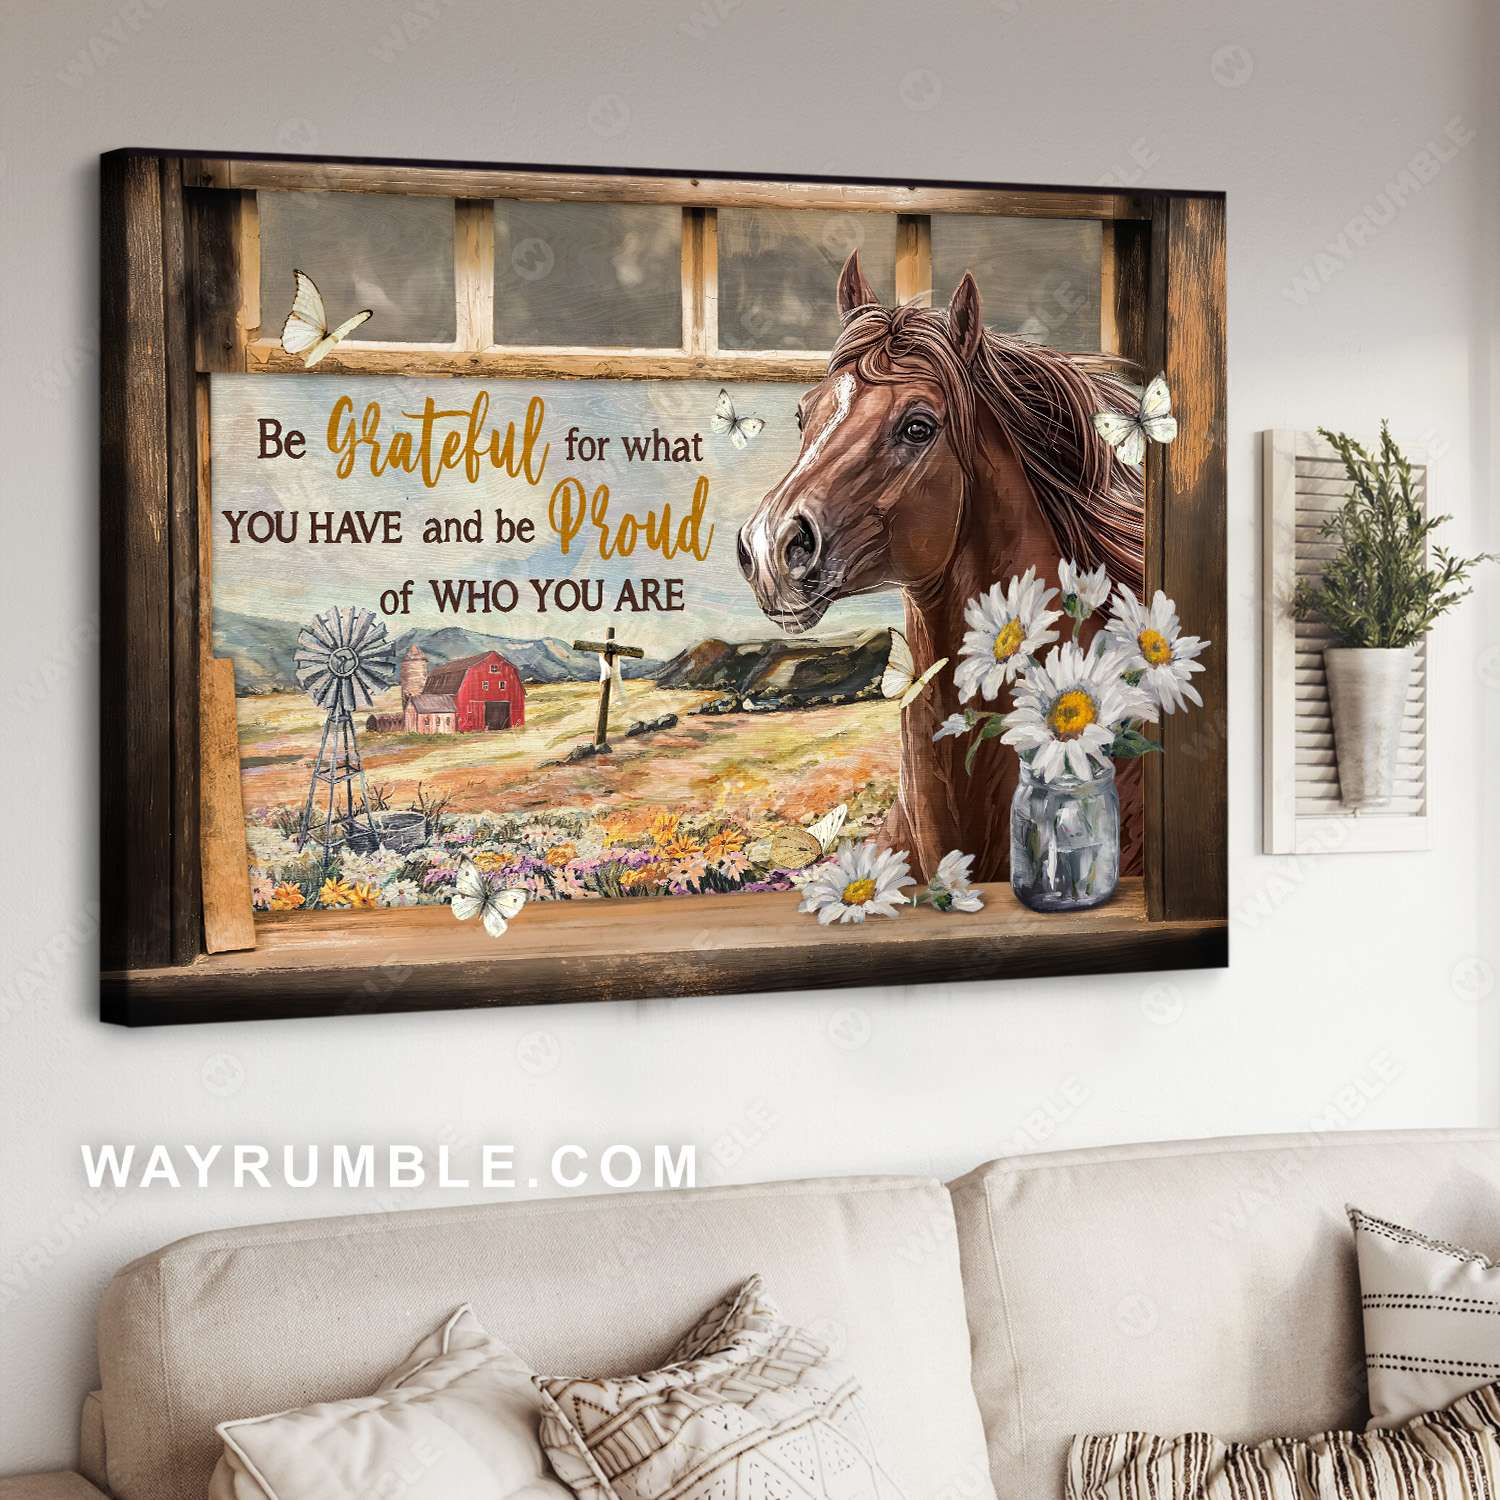  Quarter horse, Stable, Daisy flower, Old barn, Be grateful for what you have - Jesus Landscape Canvas Prints, Christian Wall Art